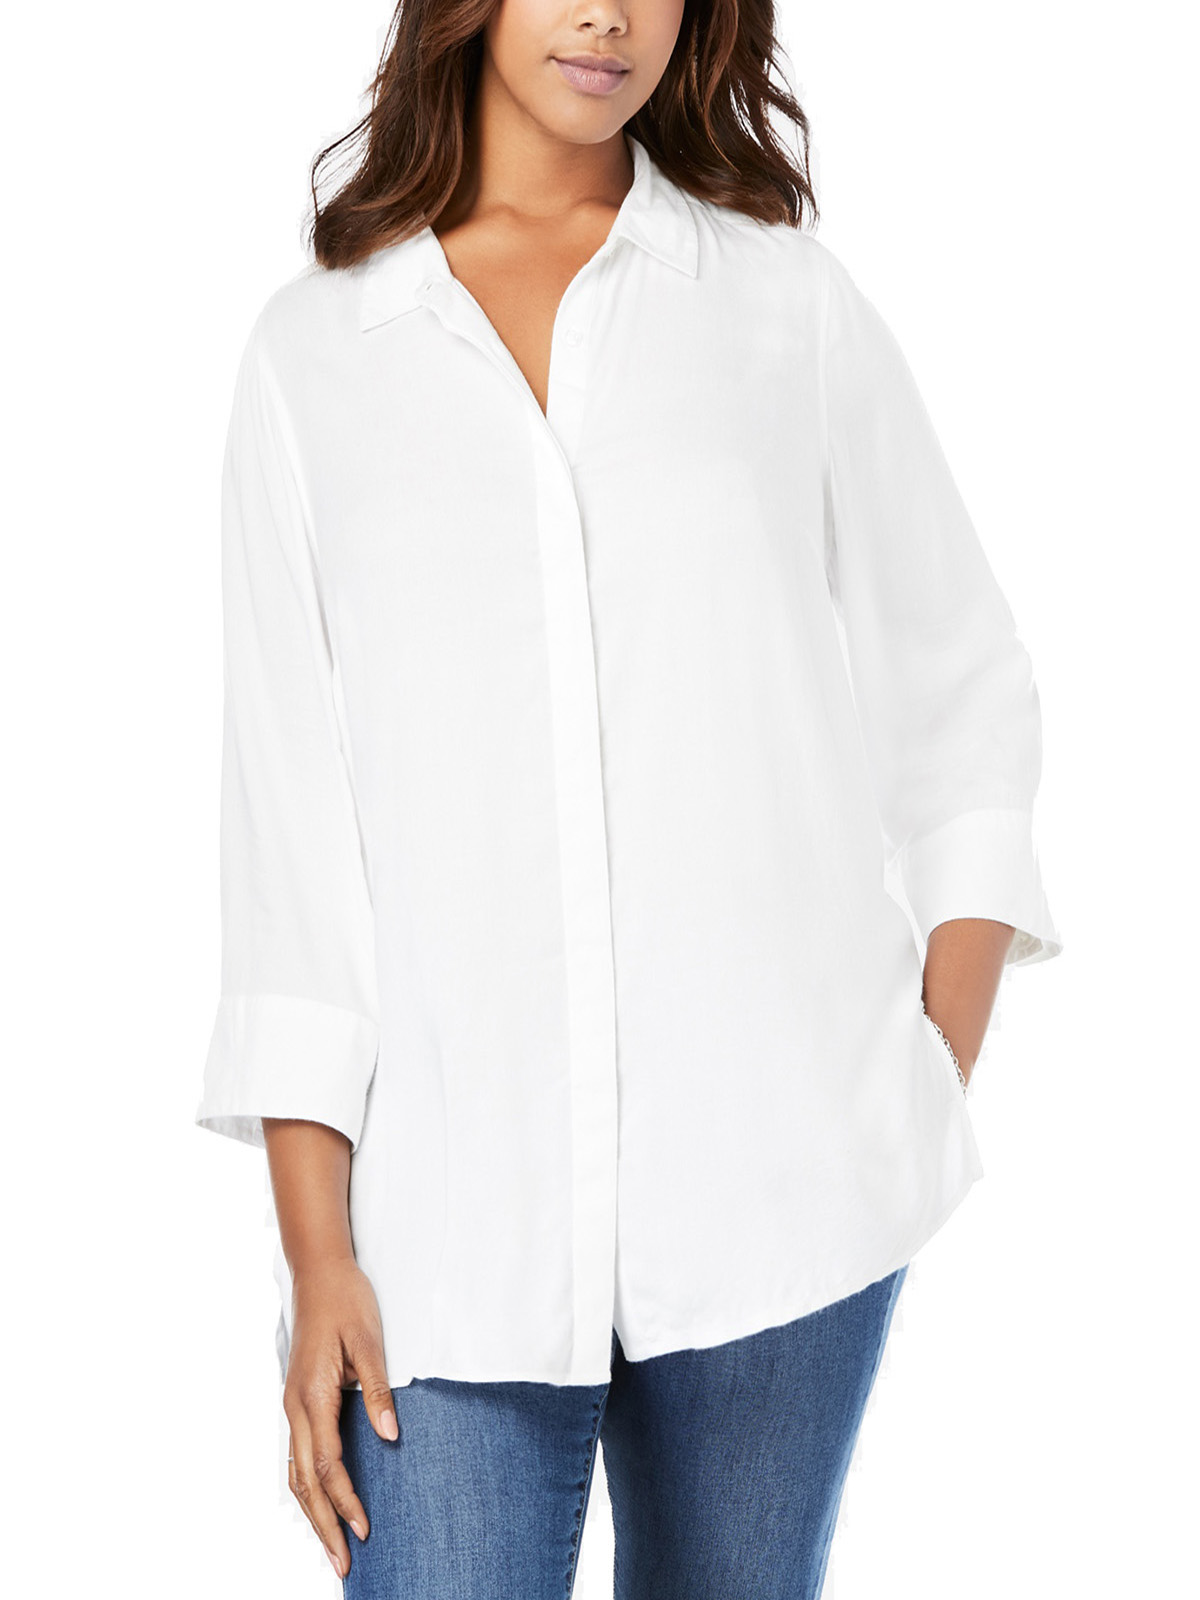 Woman Within - - Woman Within WHITE Spread Collar Elbow Sleeve A-Line ...